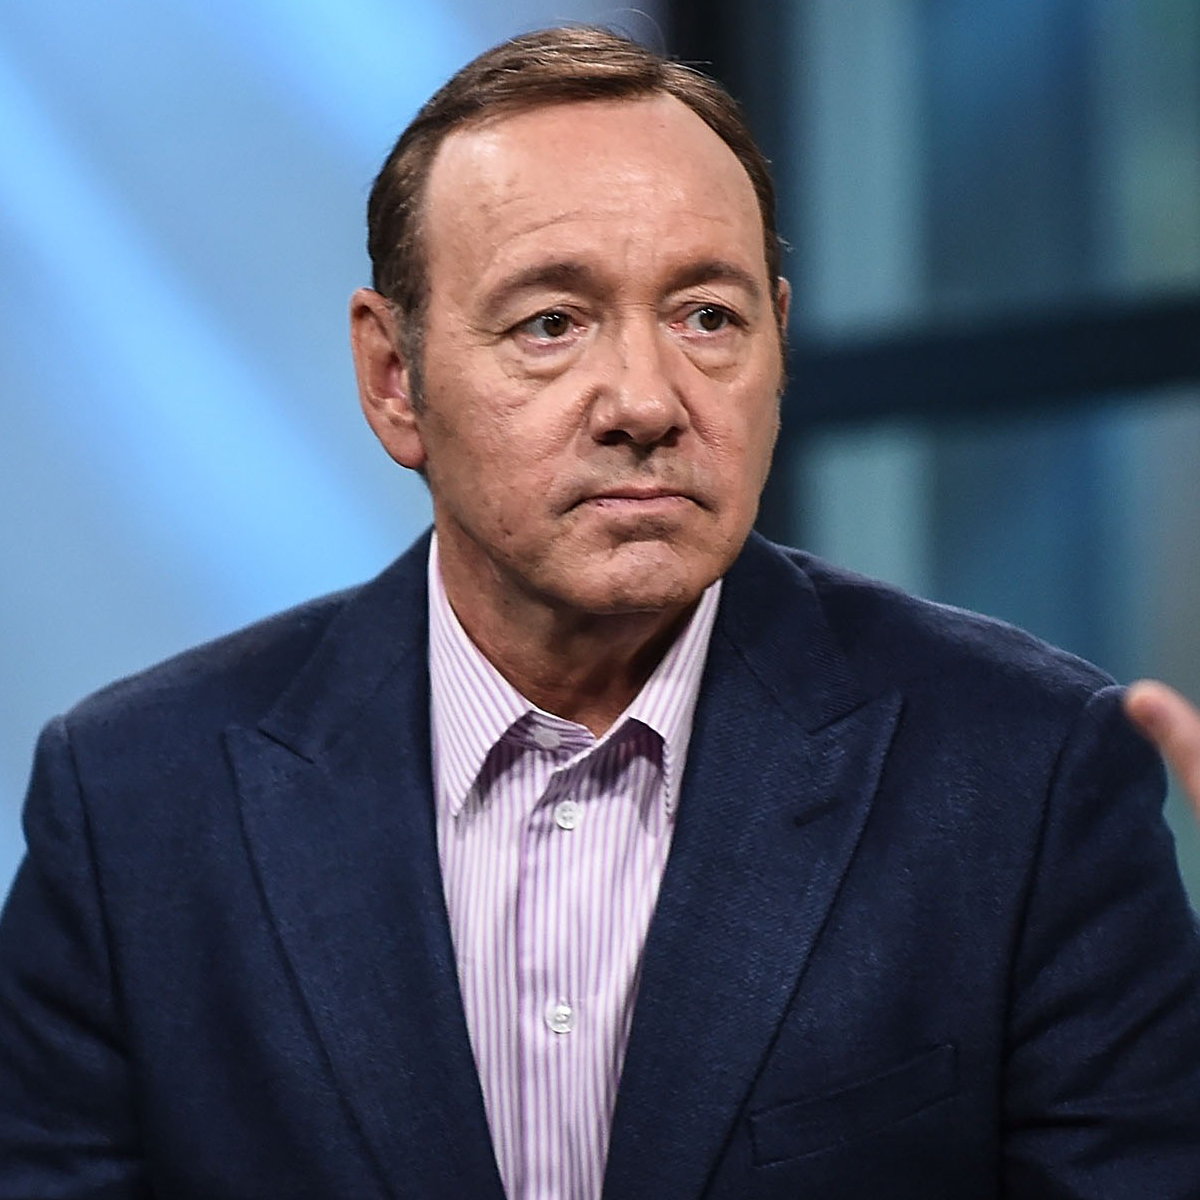 Kevin Spacey Charged With 4 Counts of Sexual Assault in the U.K.